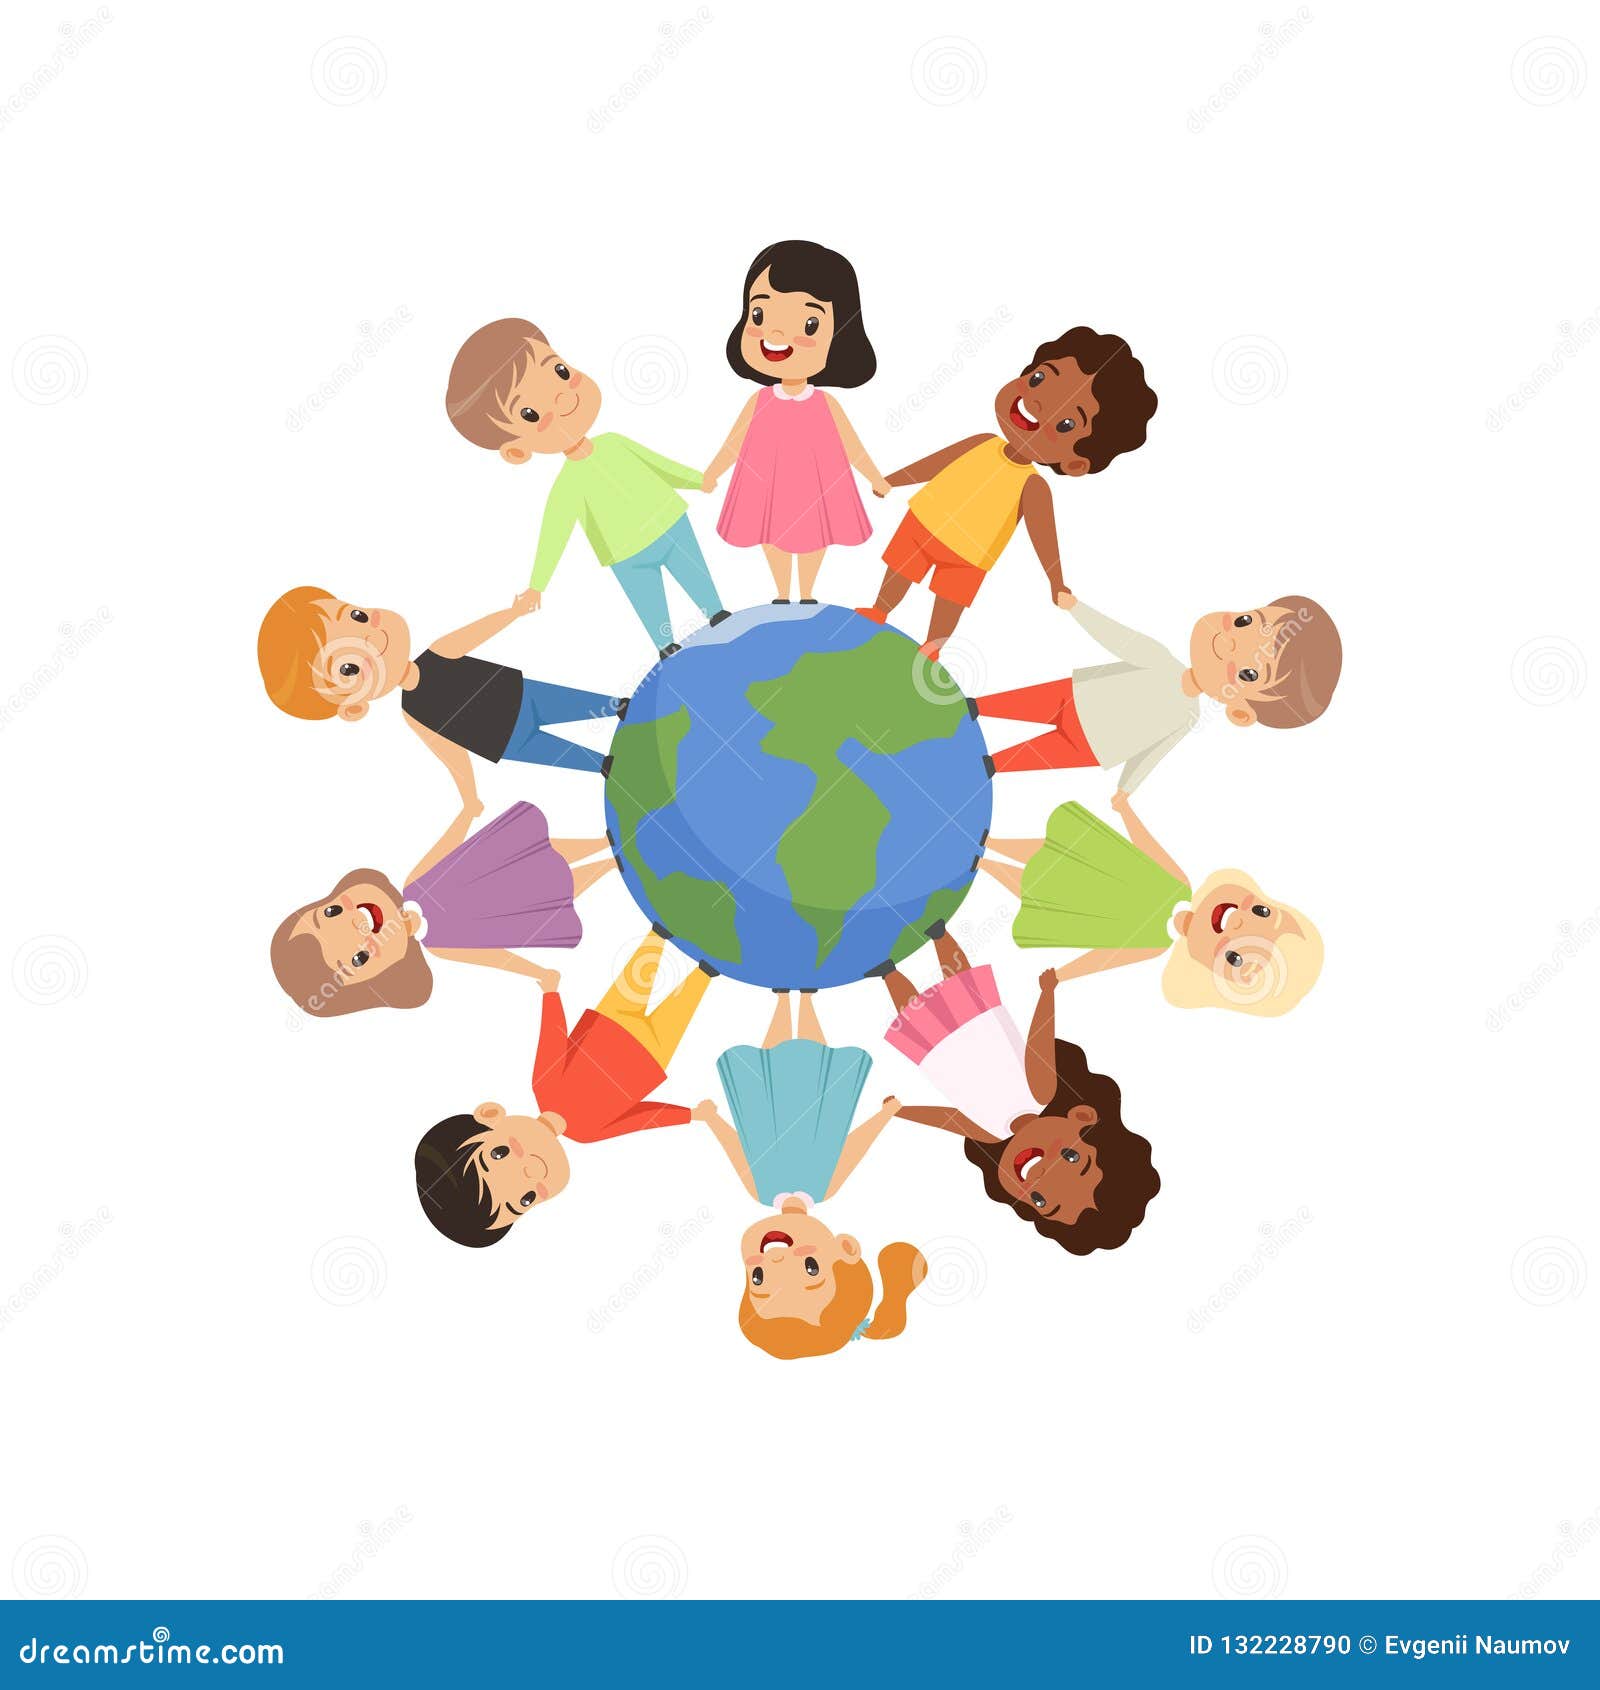 little kids of different nationalities standing and holding hands around the earth globe, friendship, unity concept